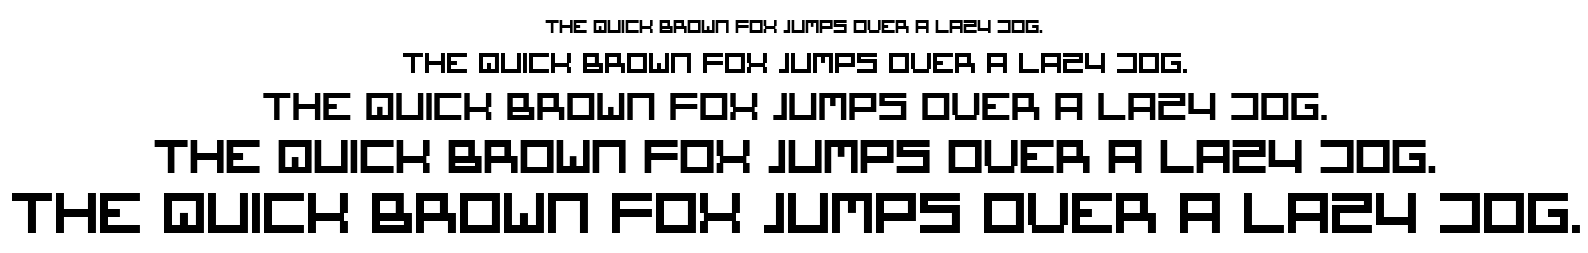 Square One font